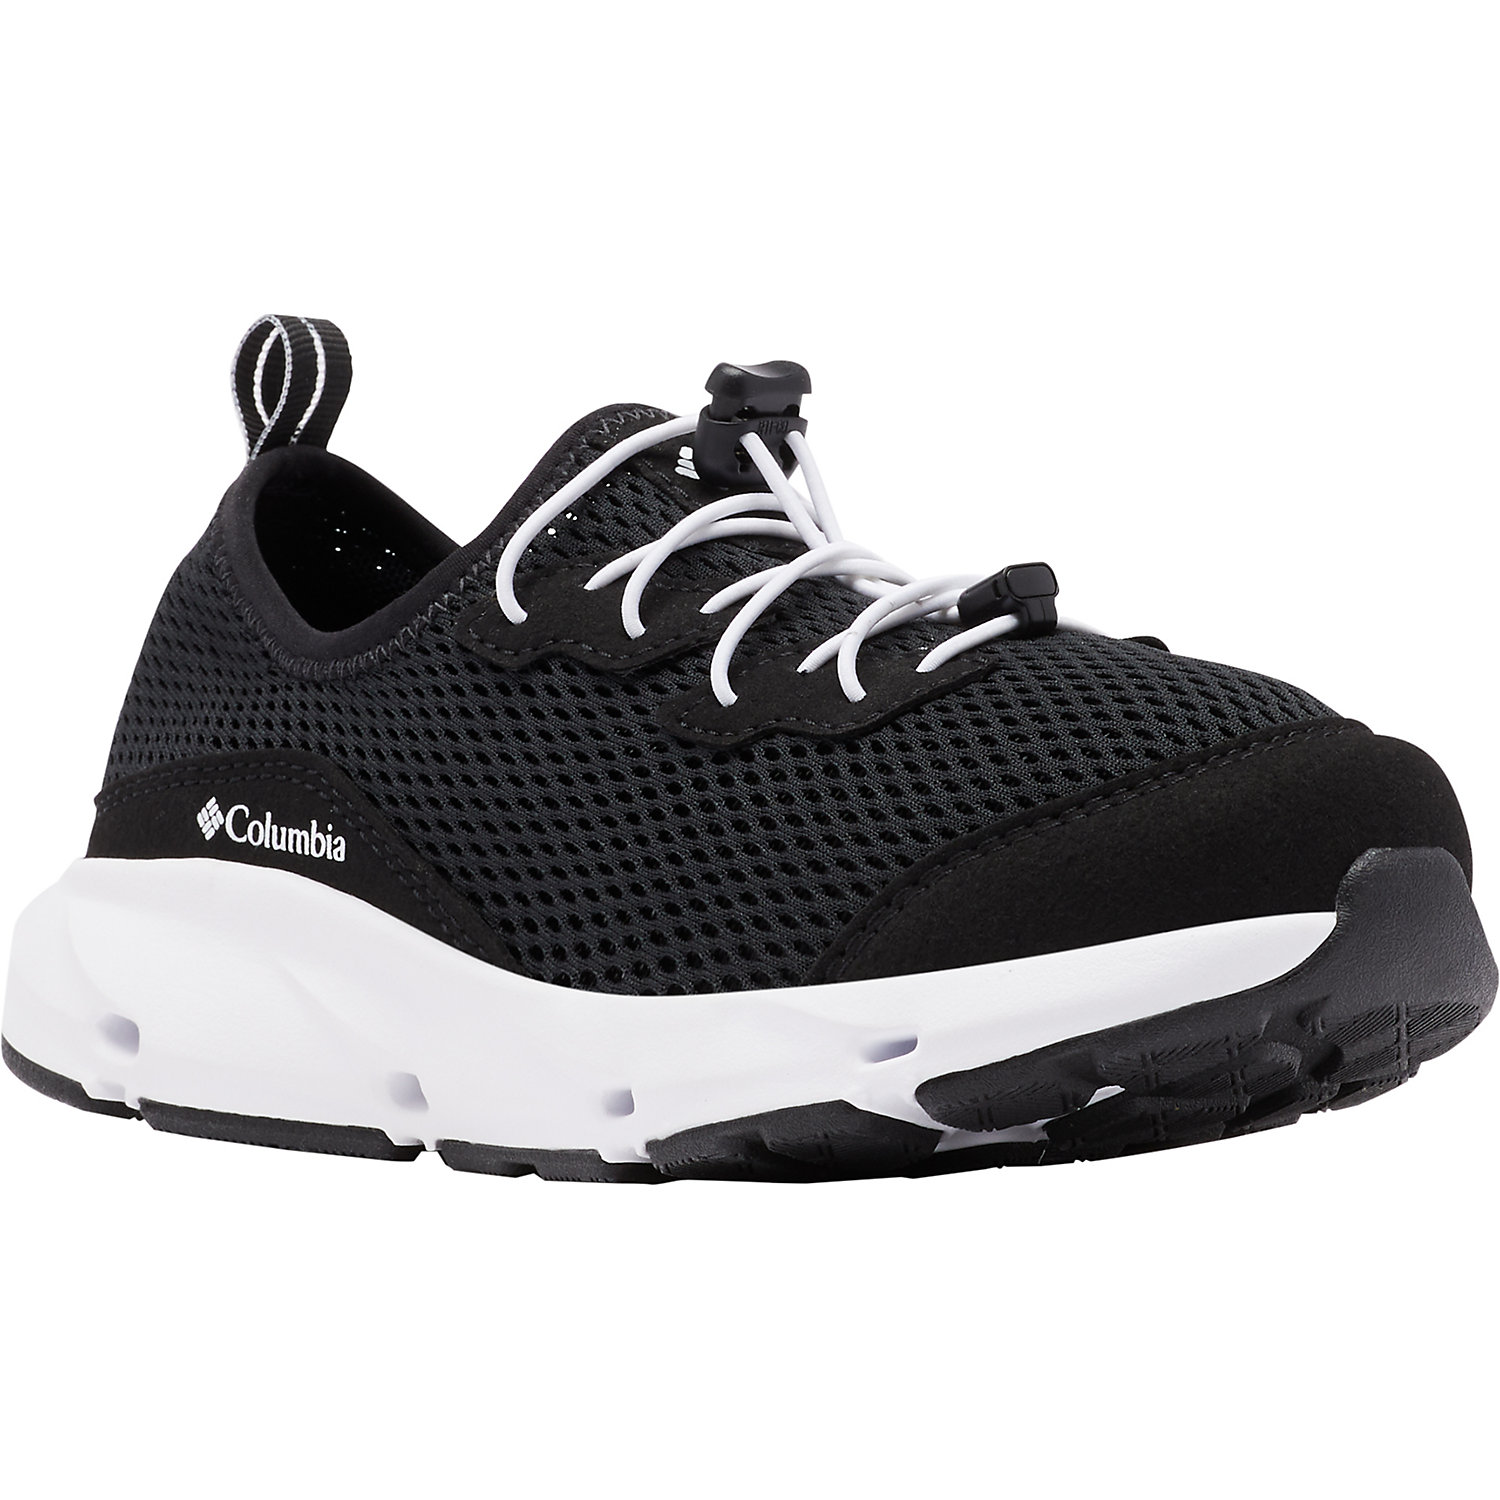 Columbia Footwear Columbia Youth Vent Shoe